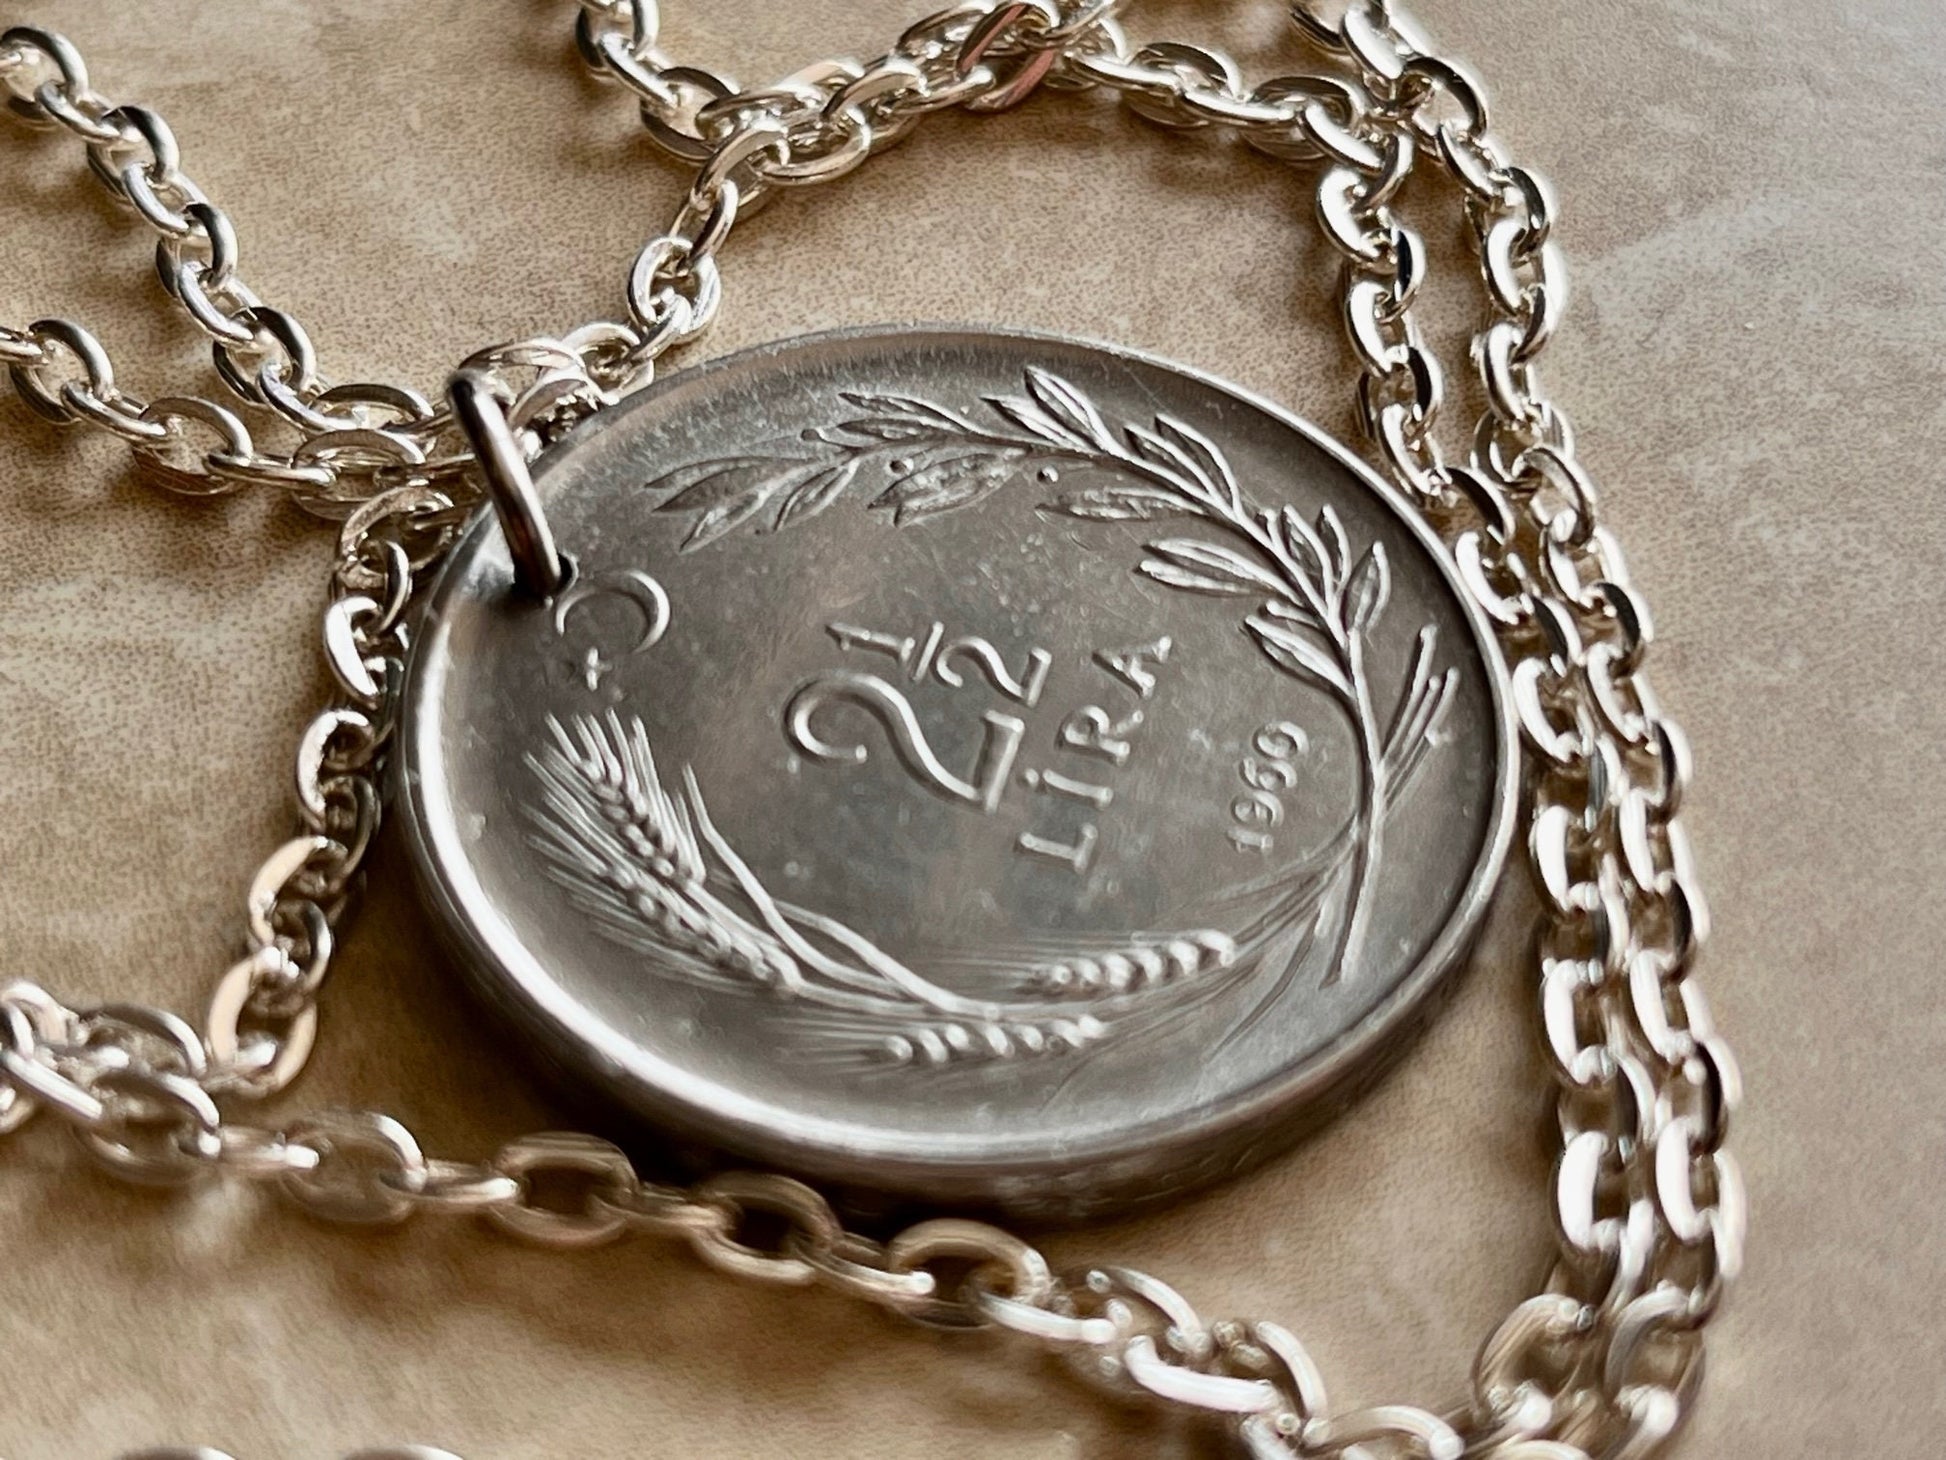 Turkey Coin Necklace Turkish 2 1/2 Lira Bin Lira Personal Old Vintage Handmade Jewelry Gift Friend Charm For Him Her World Coin Collector